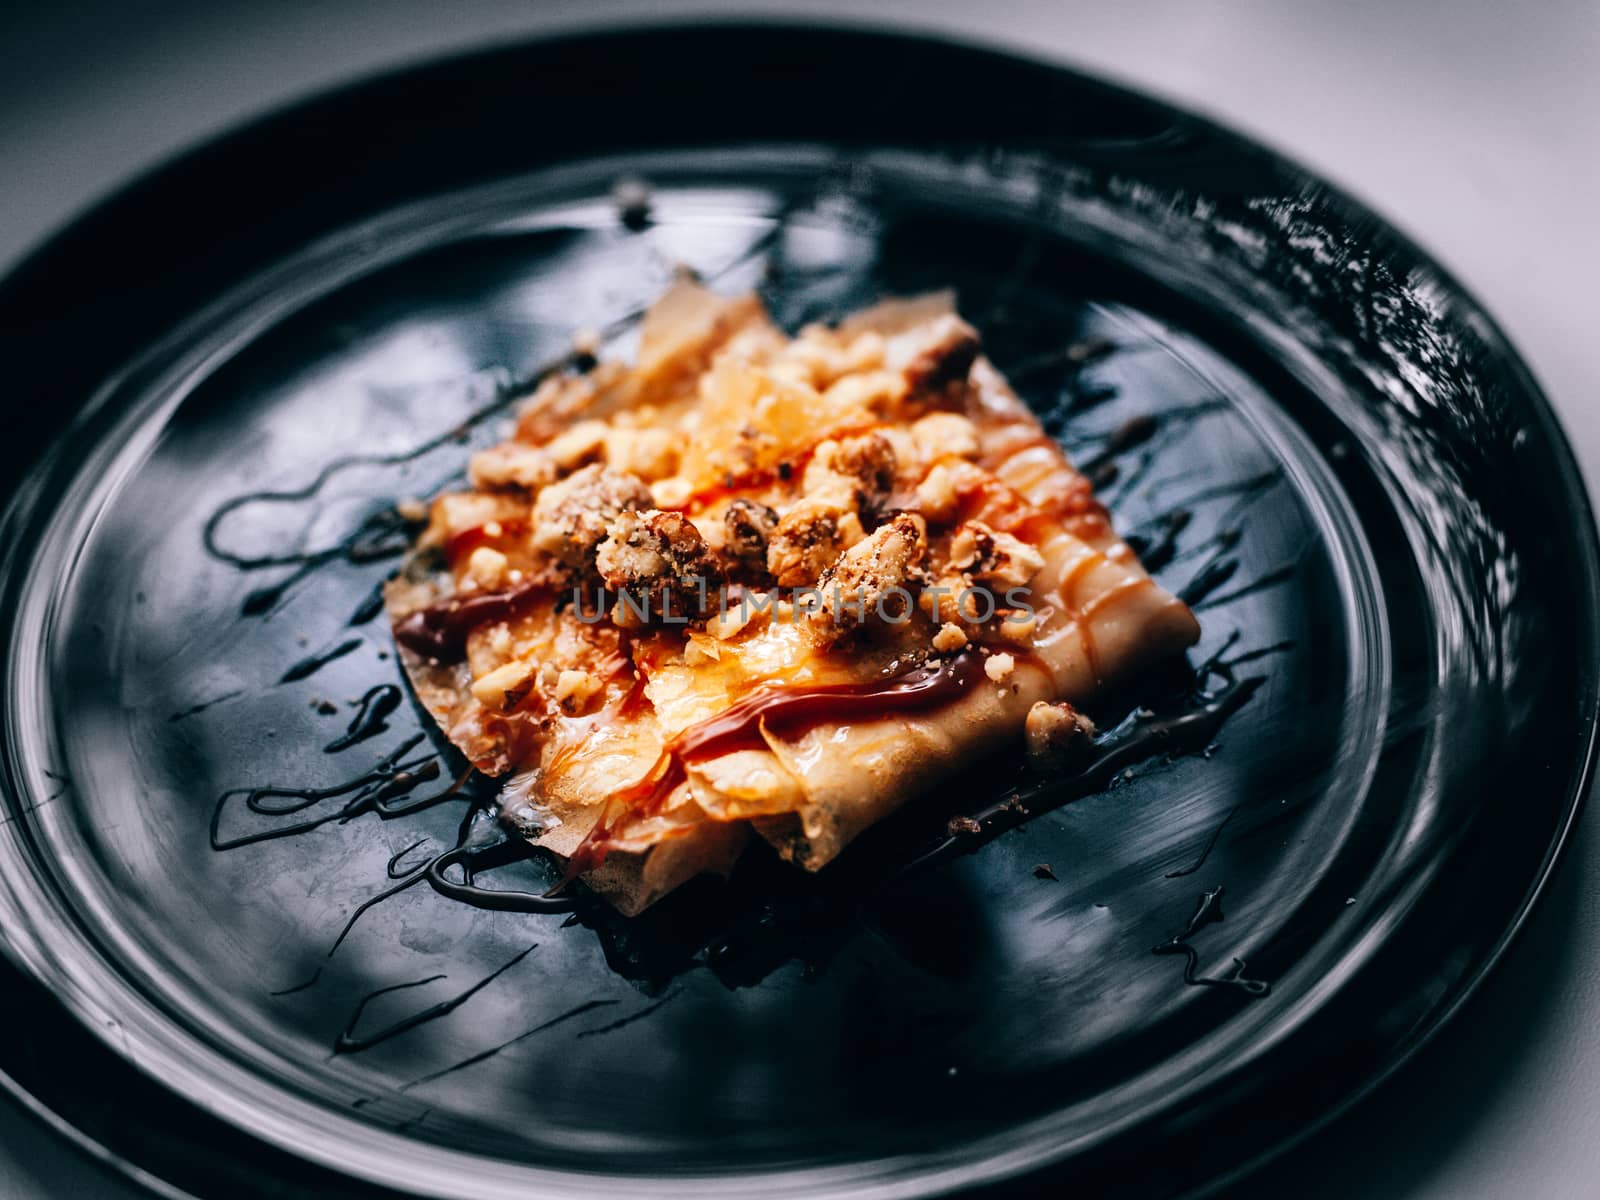 Pancakes on a black plate covered with caramel and walnuts
 by Opikanets